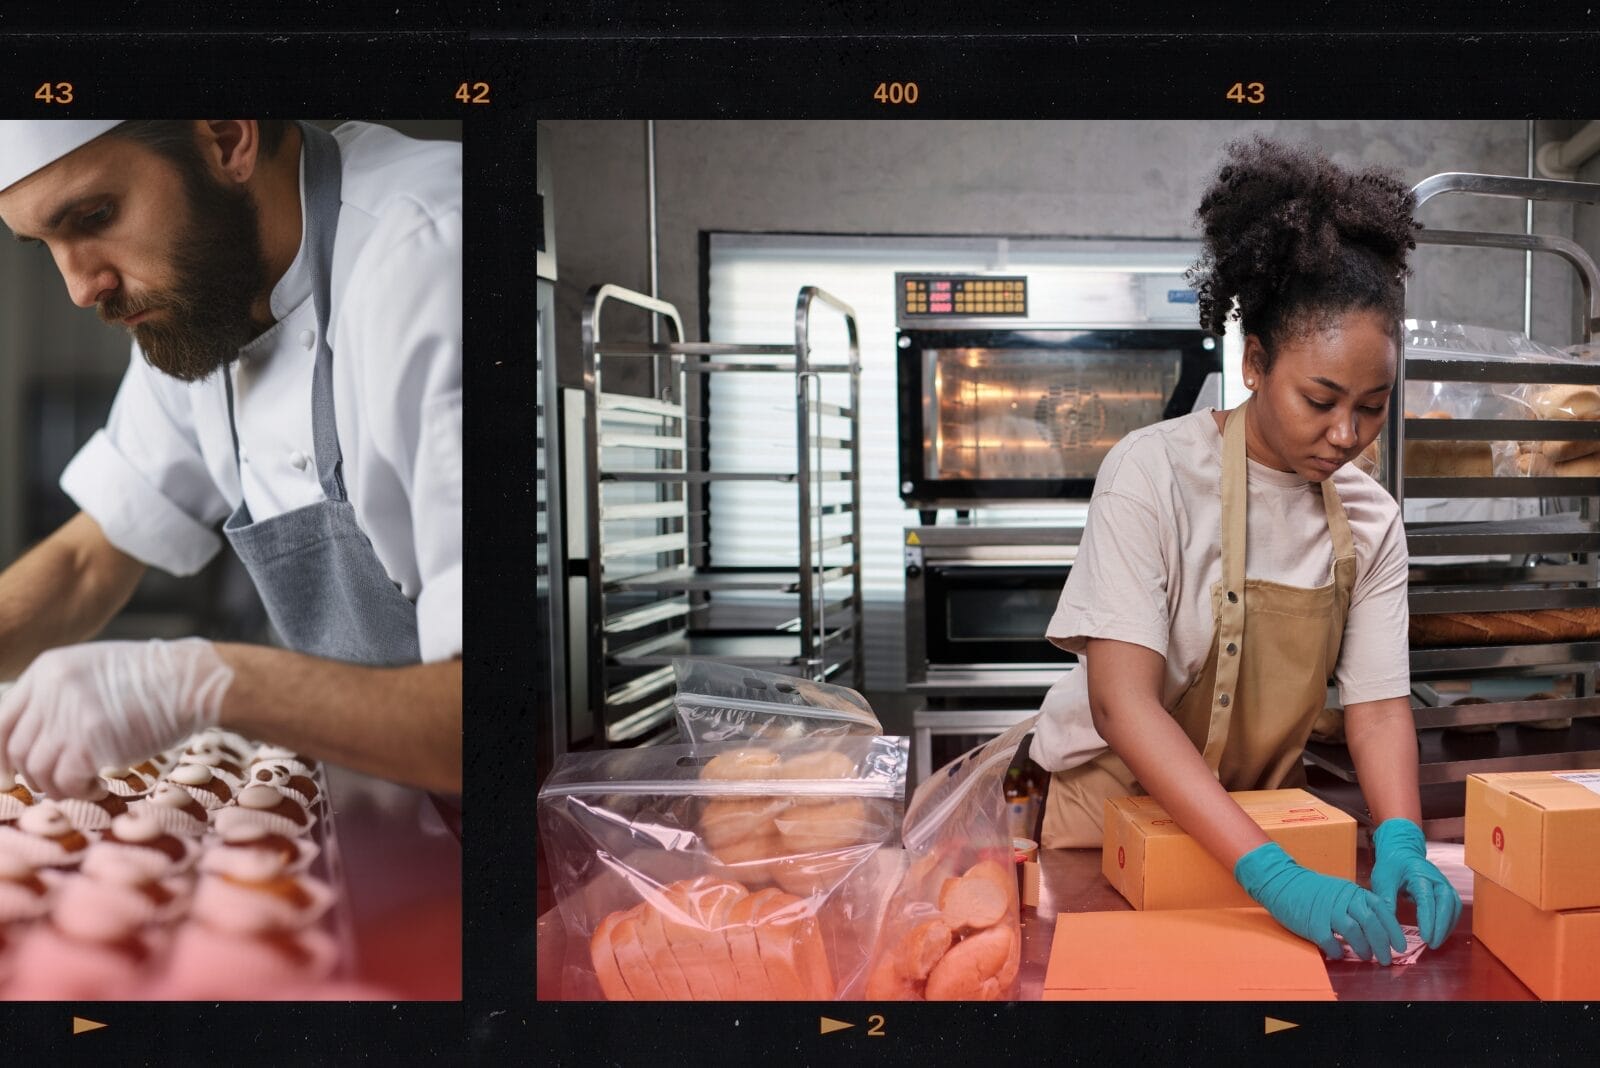 Photo strip showing low-angle view of baker decorating batch of cupcakes in commercial kitchen and a woman packing fresh-baked bread and pastries in boxes